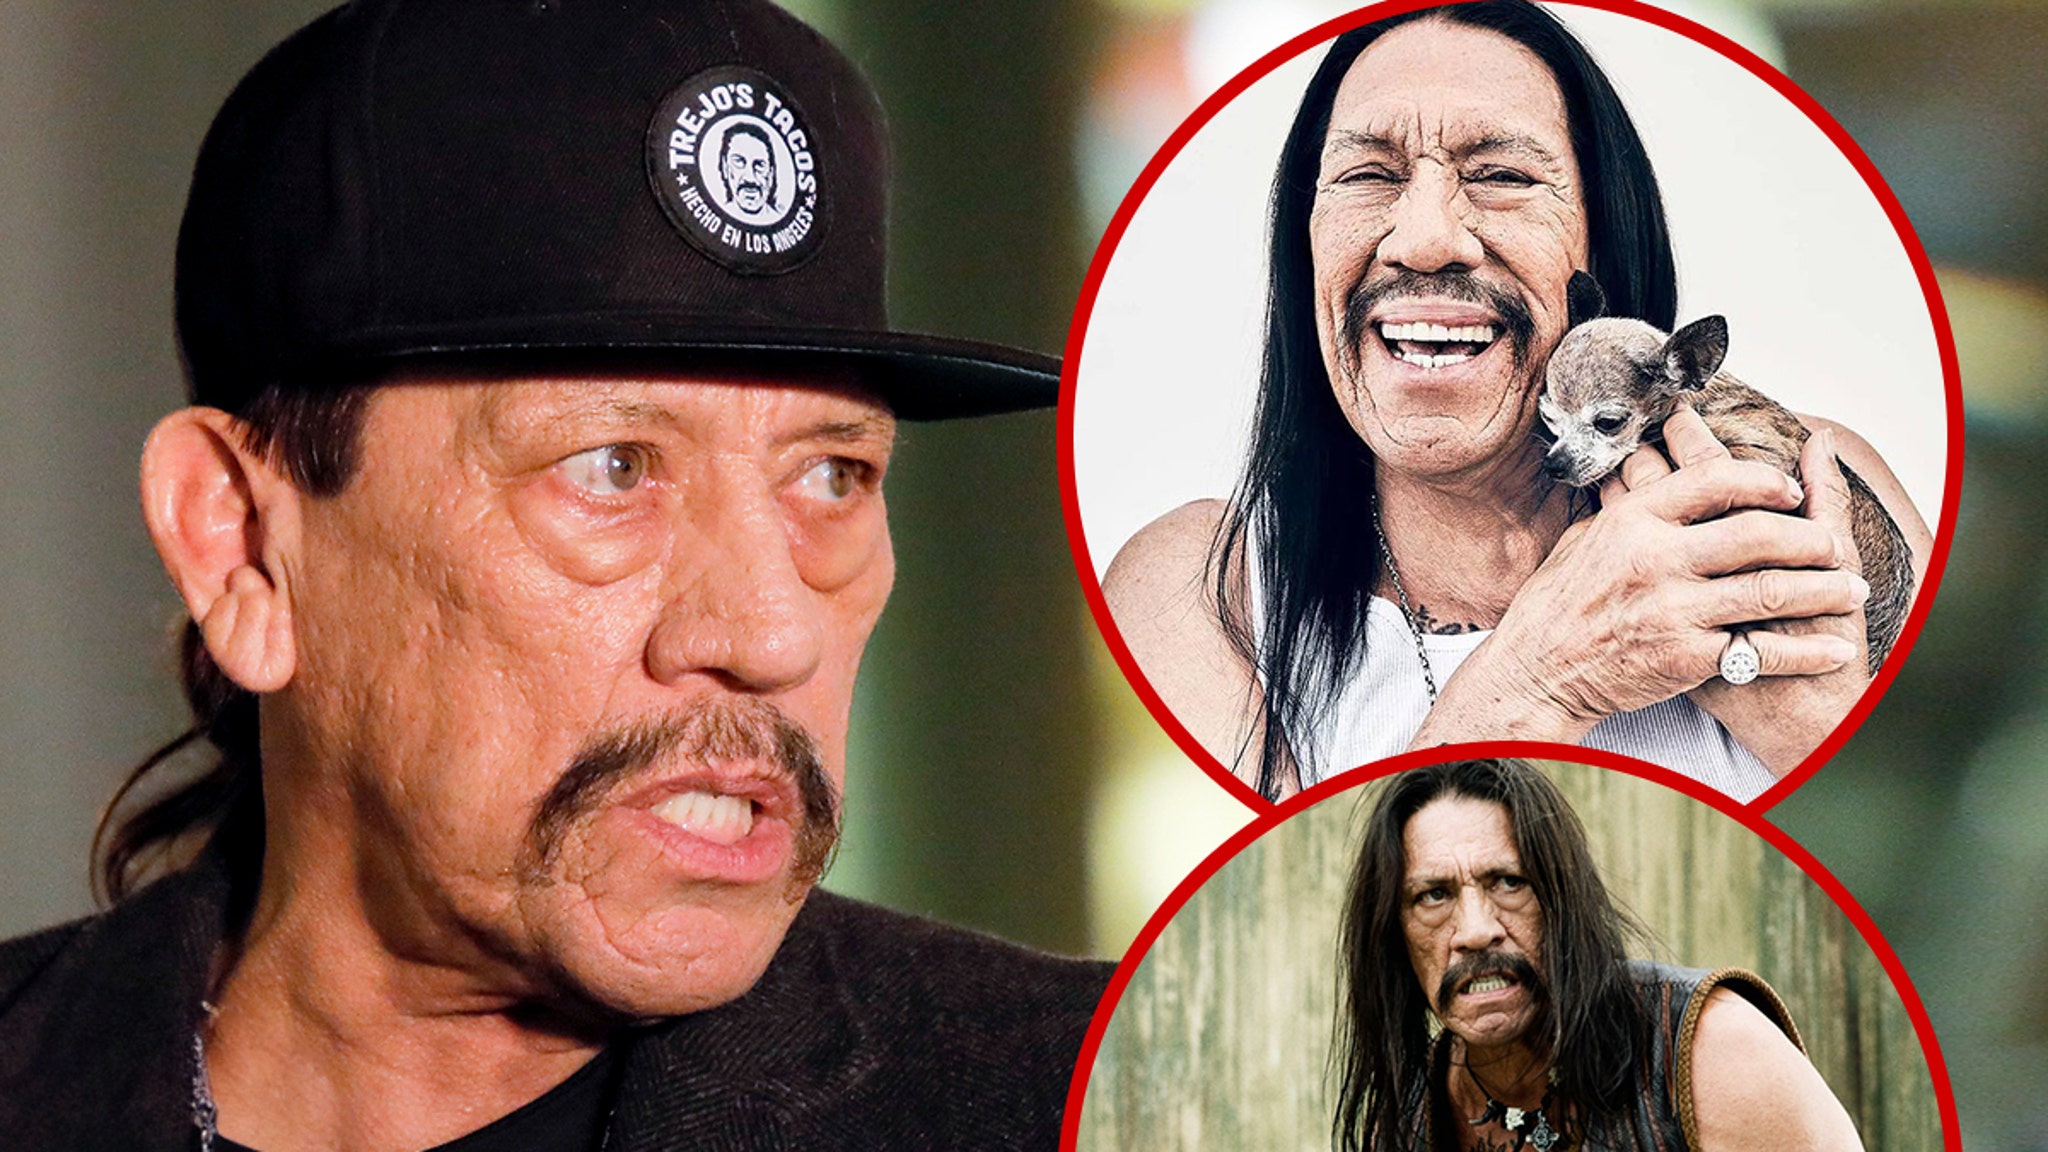 Danny Trejo's Badass Chihuahua Reminded Him Of His Classic Character